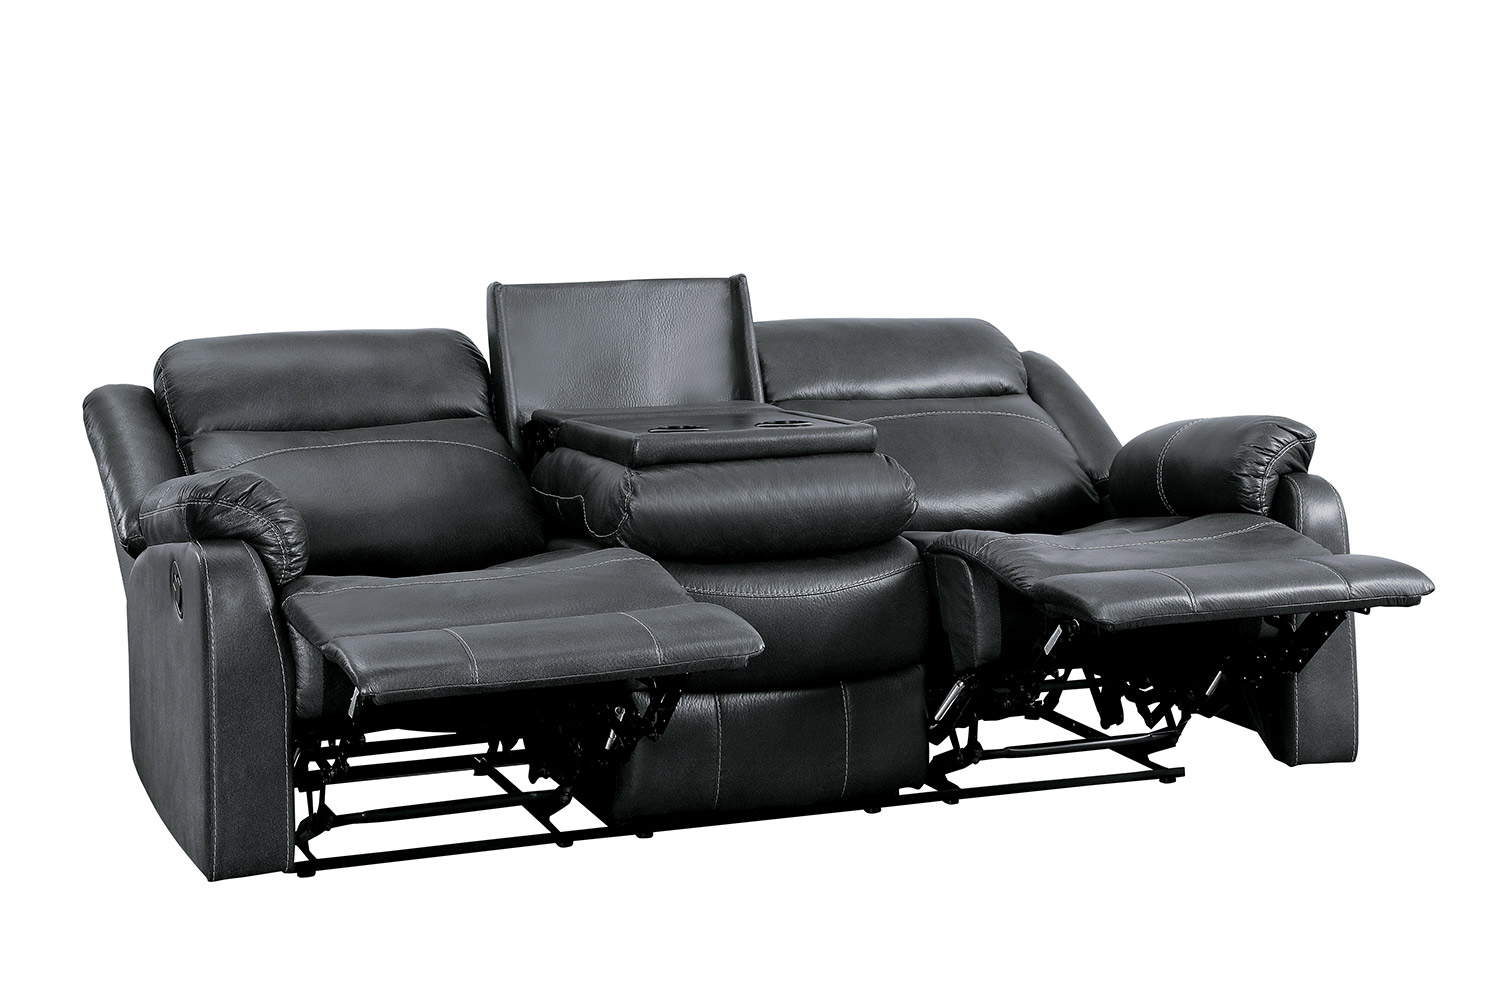 Homelegance Yerba Double Lay Flat Reclining Sofa With Center Drop-Down Cup Holders - Dark Gray